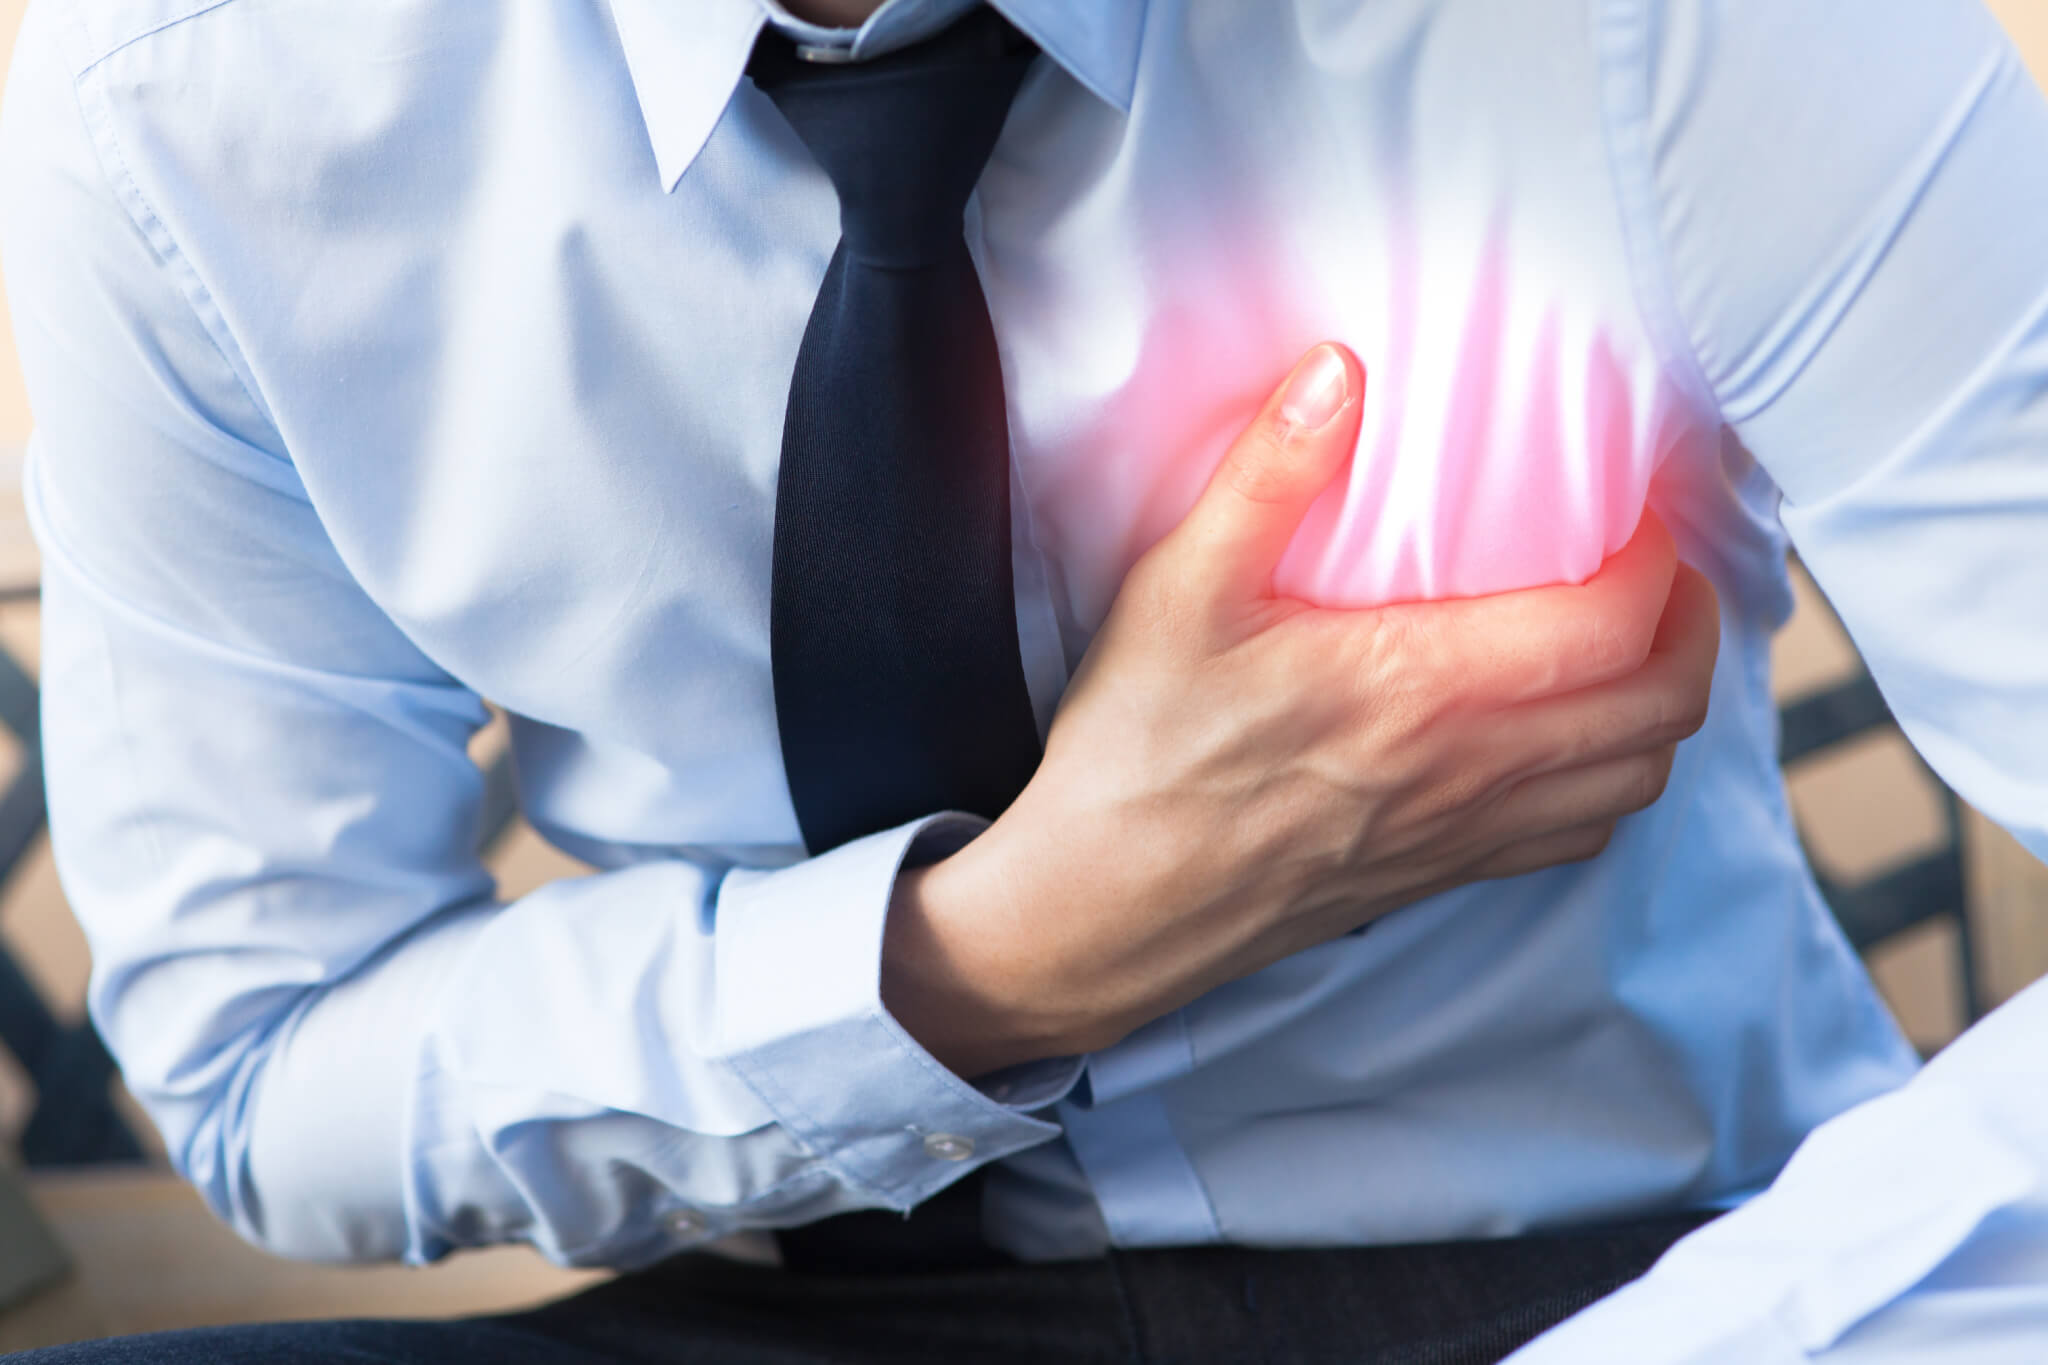 Young people have heart attacks more often – why is this?